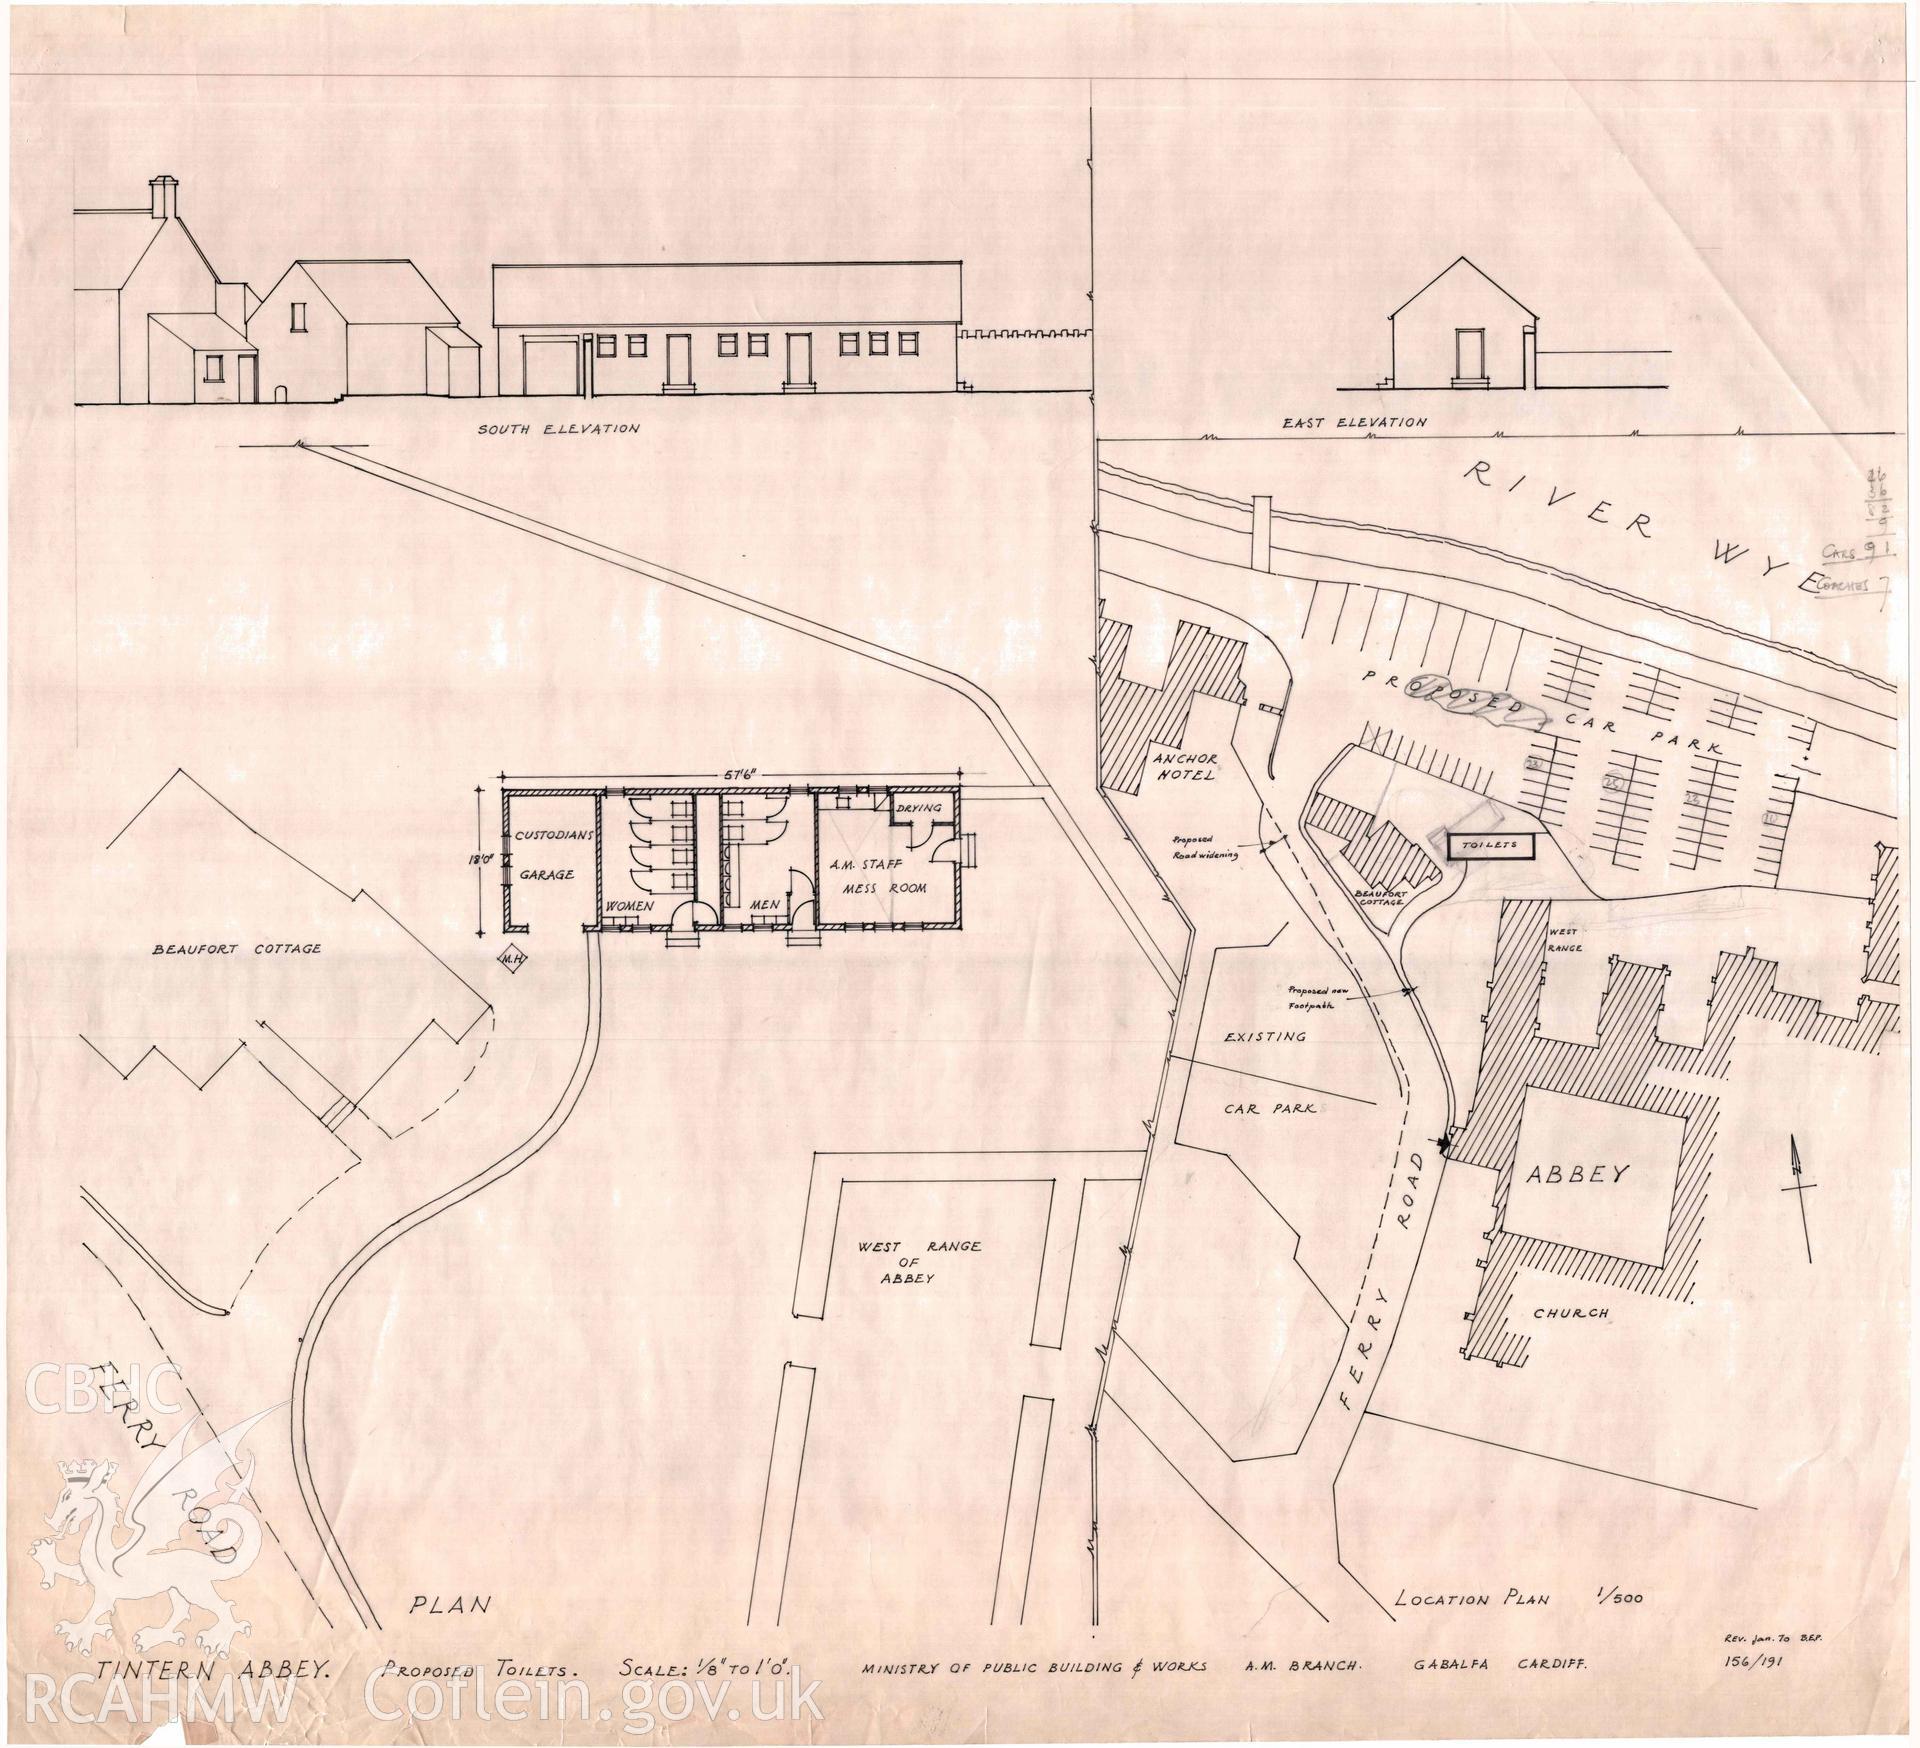 Cadw guardianship monument drawing, location plan of proposed toilets, Tintern Abbey.  Dated January 1970.